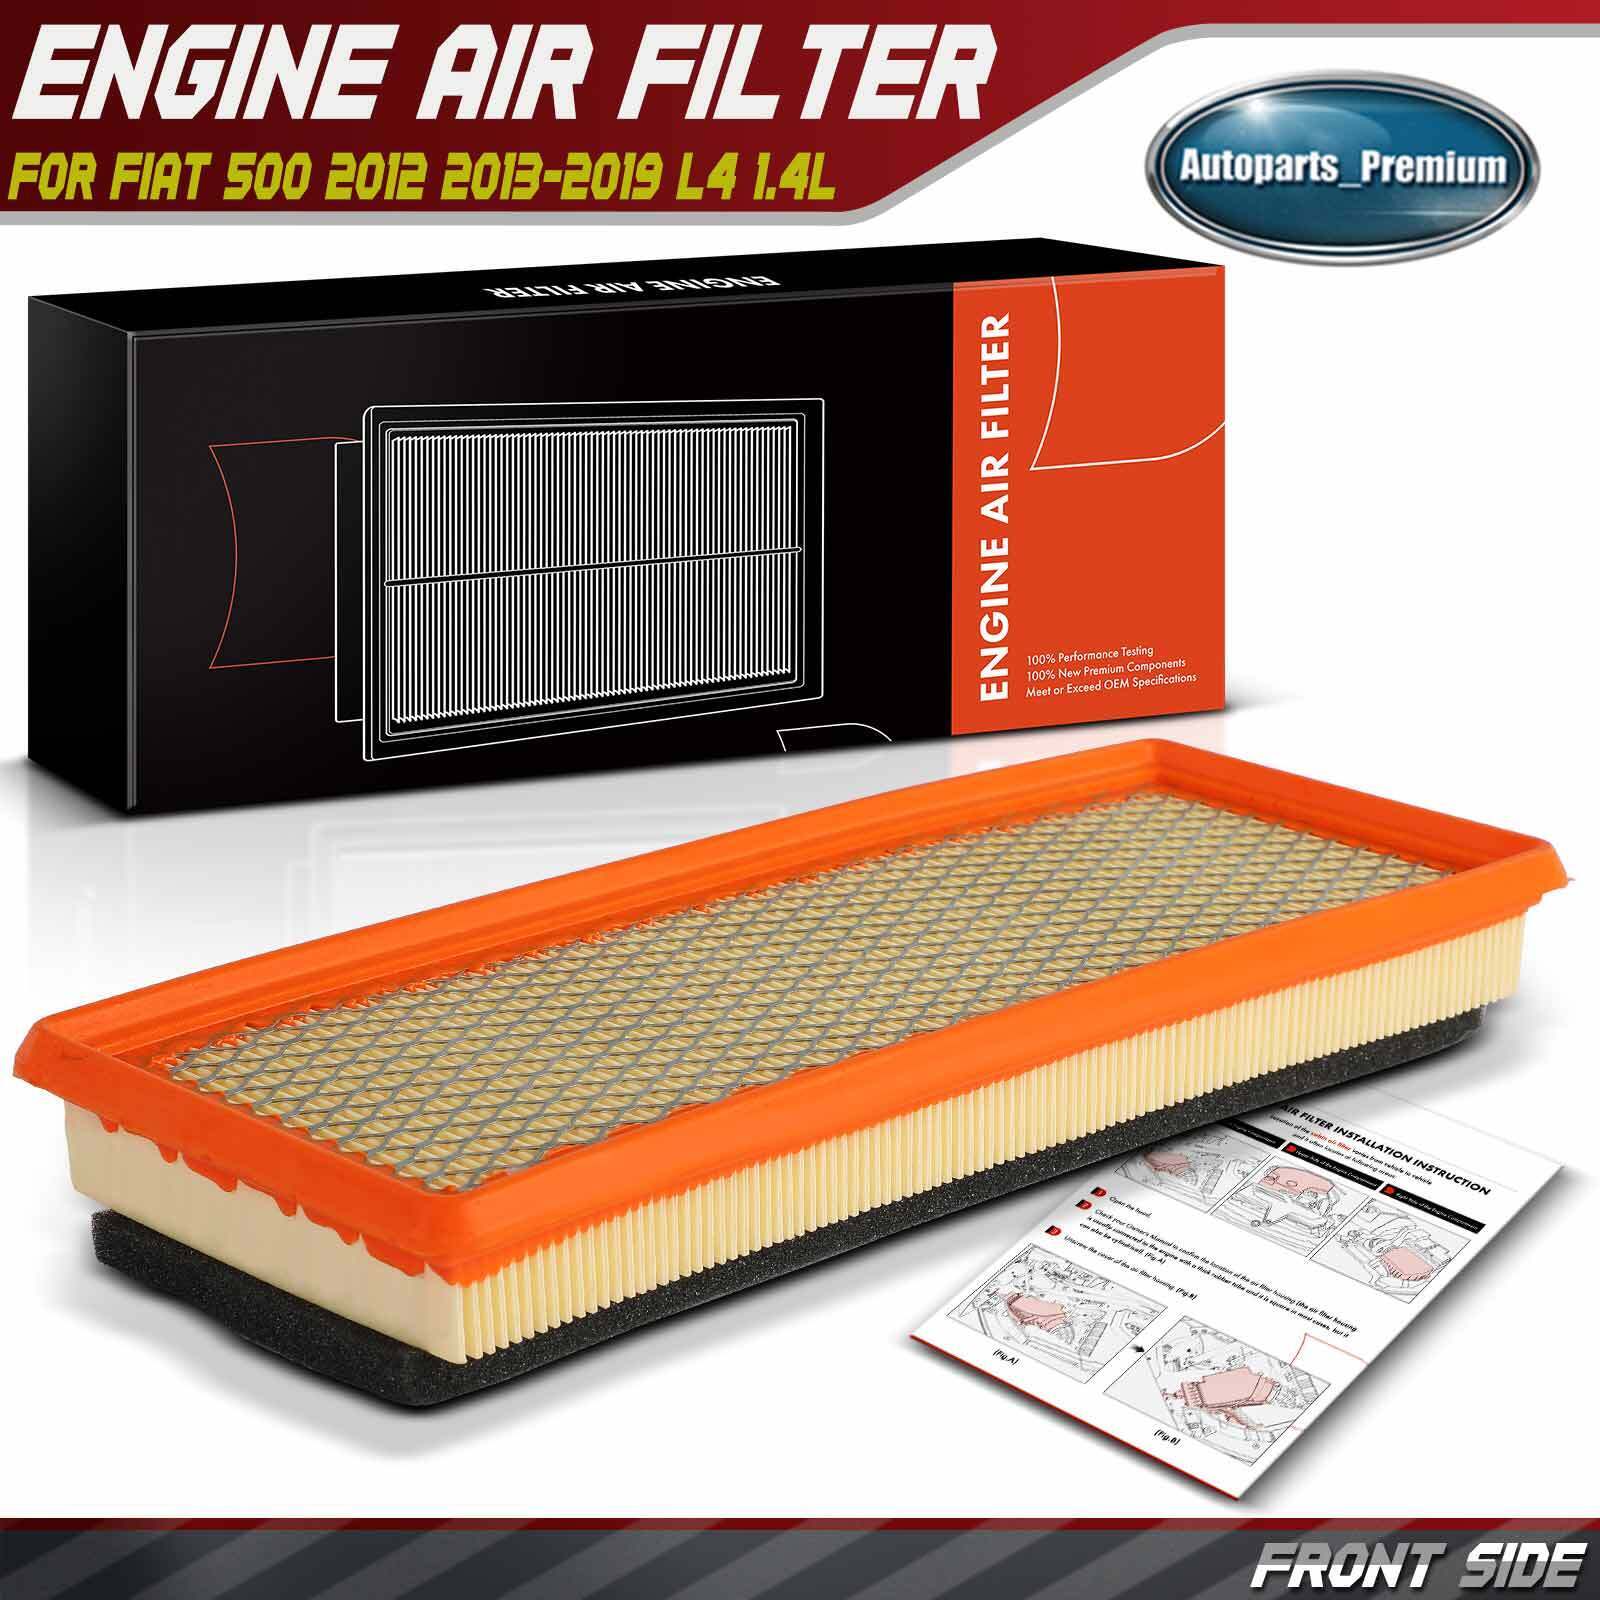 New Engine Air Filter for Fiat 500 2012 2013 2014-2019 L4 1.4L Flexible Panel